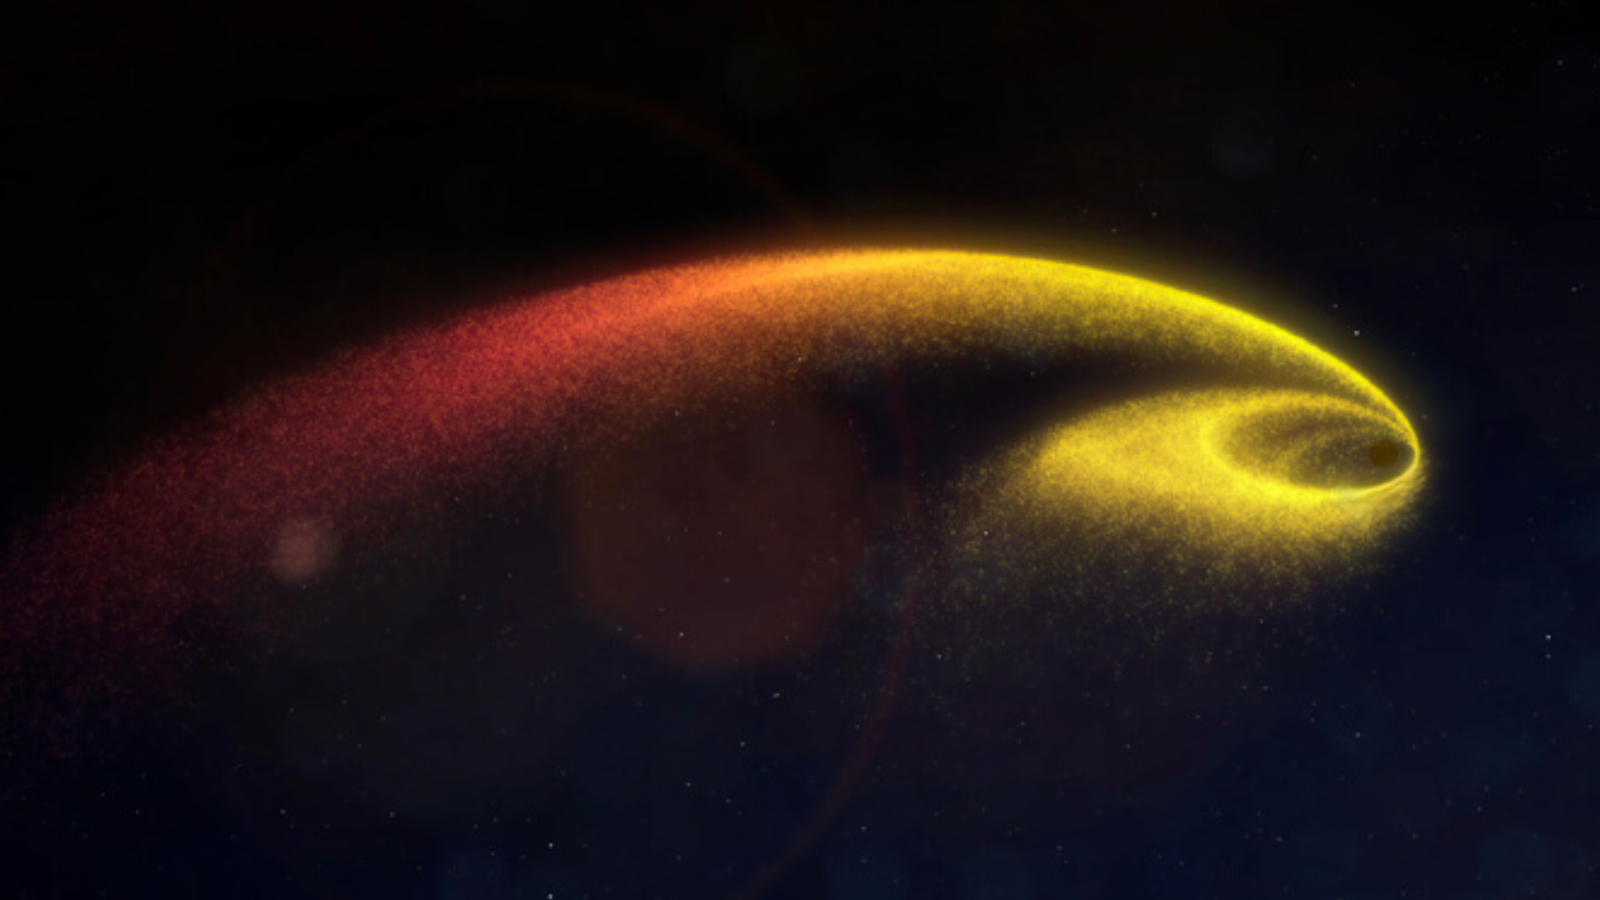 illustration showing a yellow-orange spiral in the blackness of space